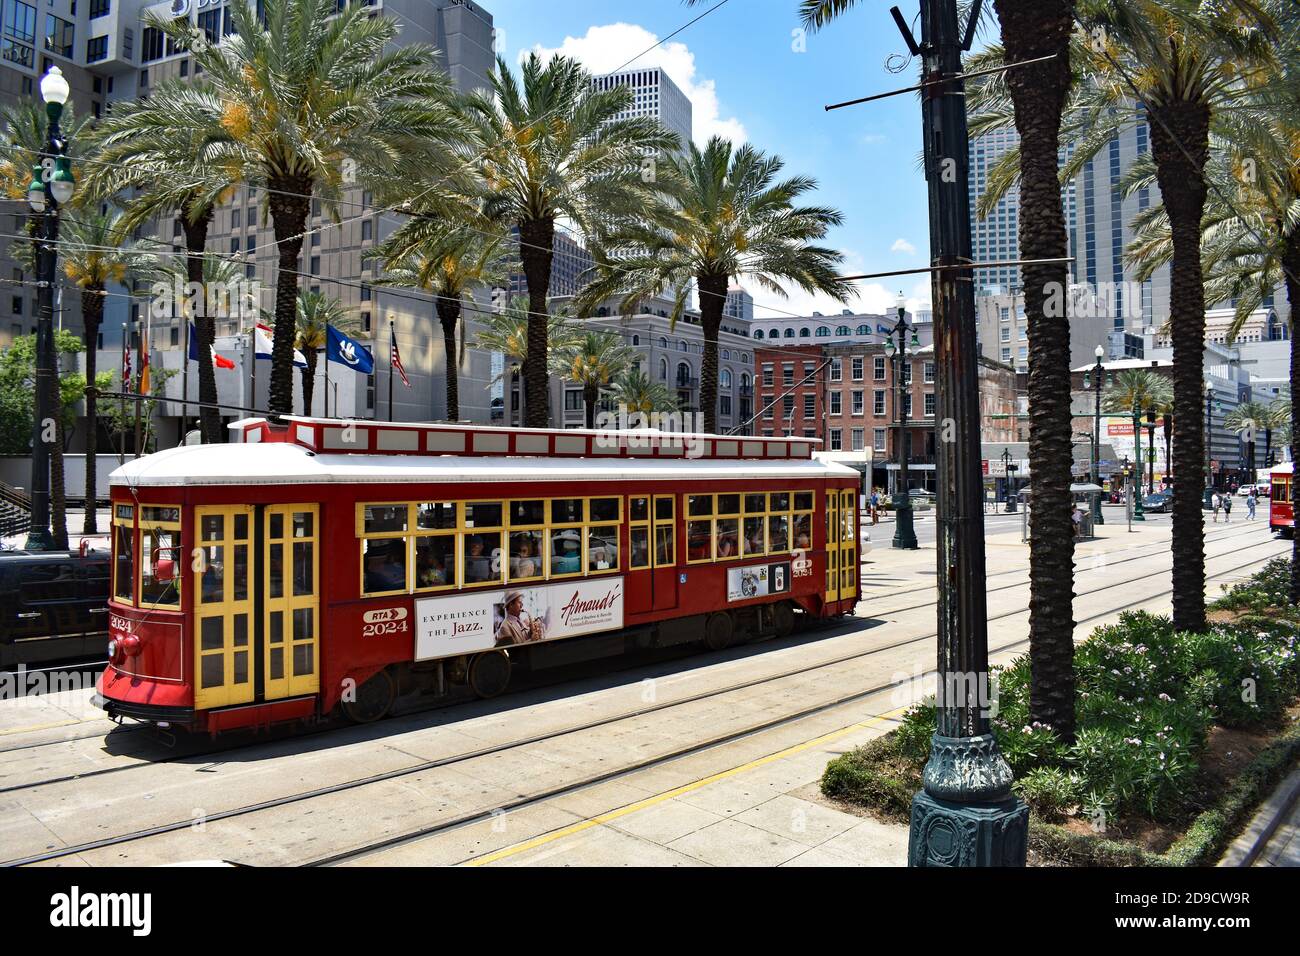 A traditional red and yellow streetcar on the Canal street line, New Orleans, Louisiana, USA. The wide street lined with palm trees & modern buildings. Stock Photo